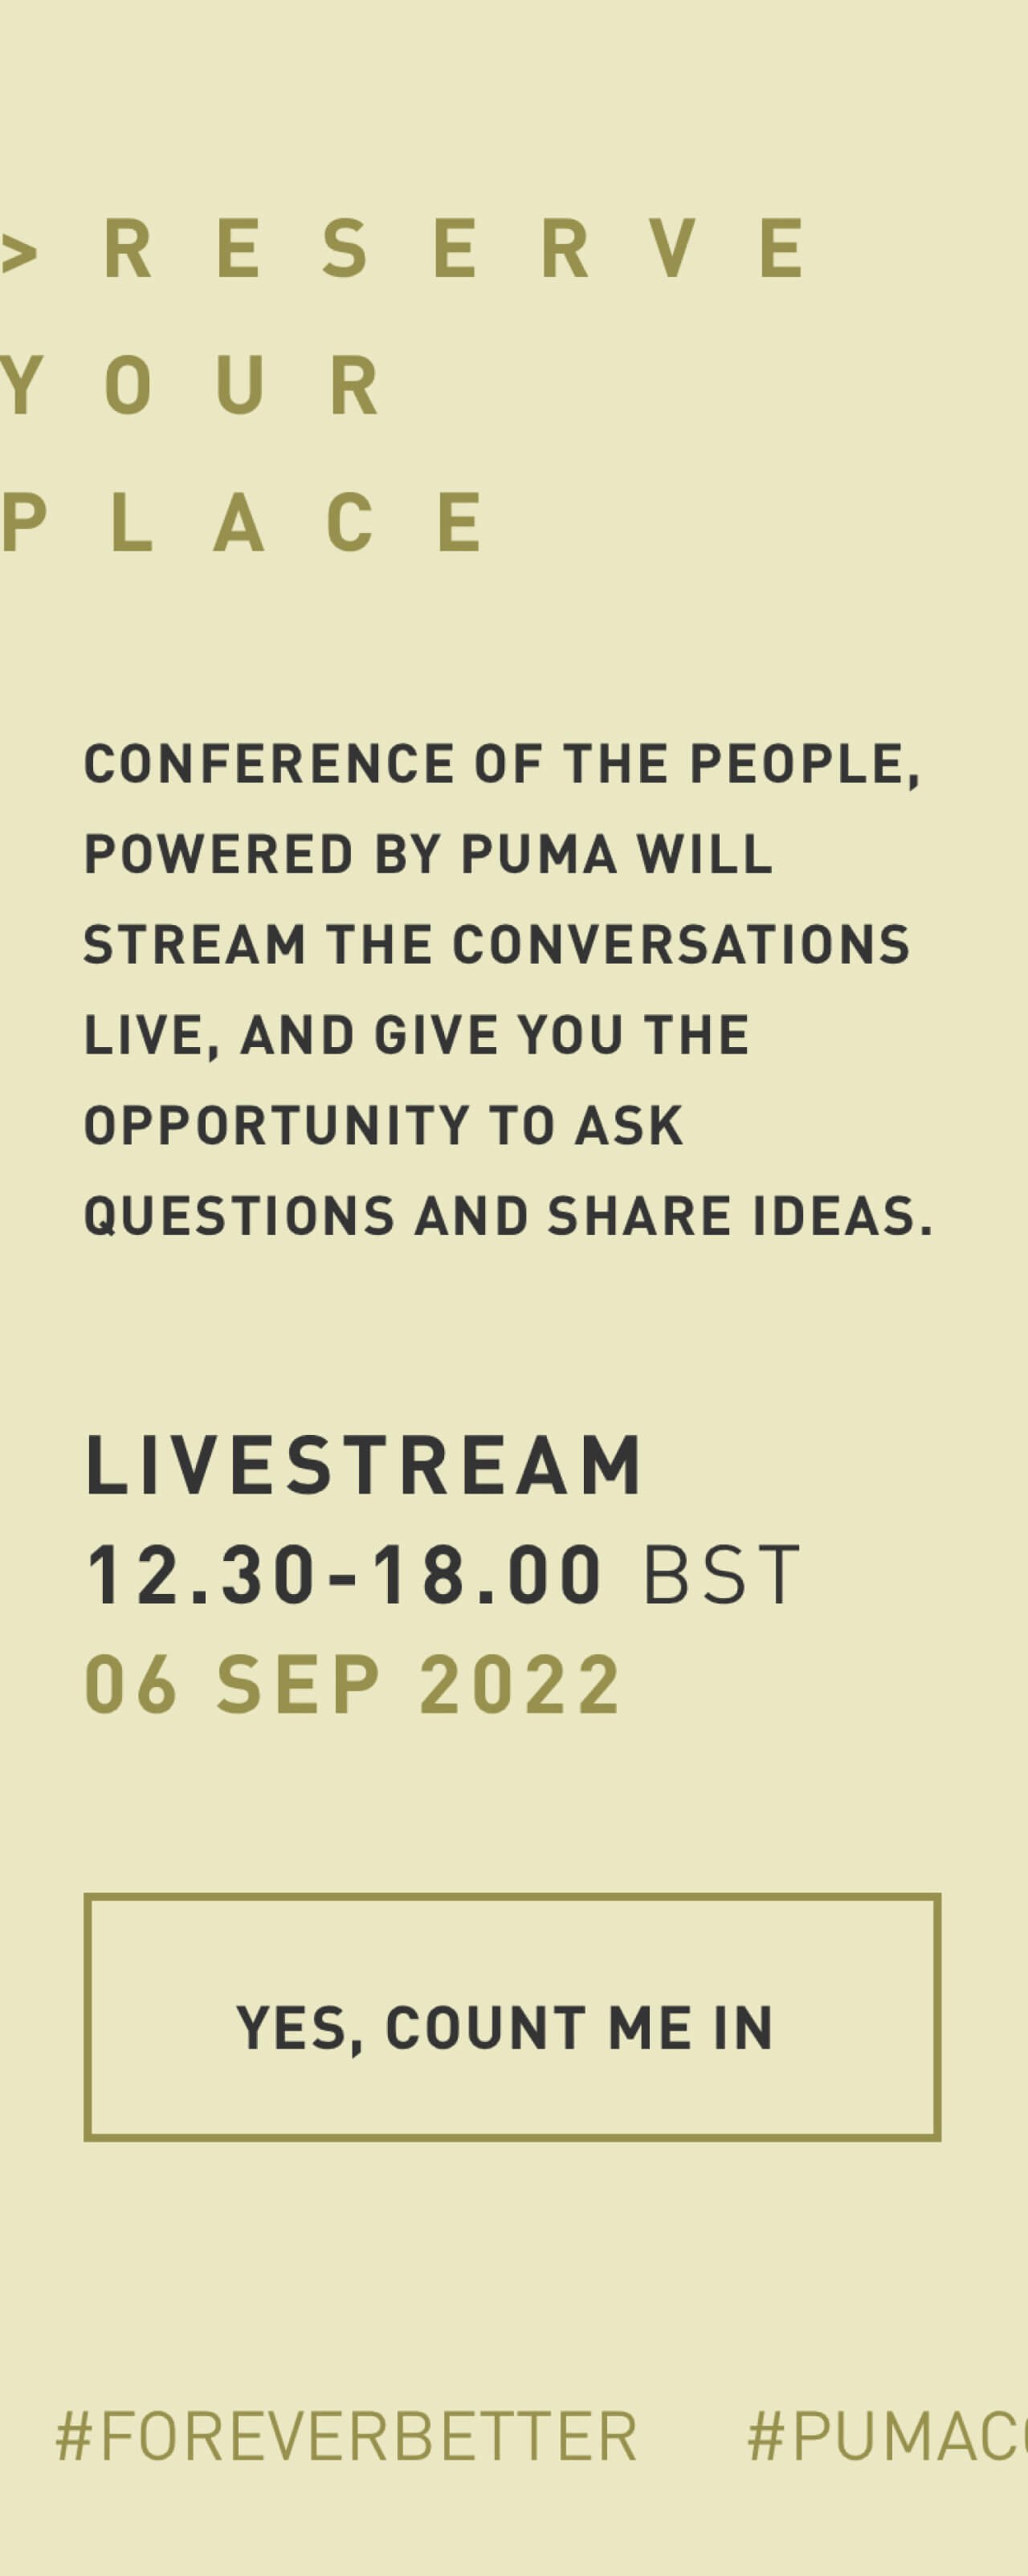 RESERVE YOUR PLACE | CONFERENCE OF THE PEOPLE, POWERED BY PUMA WILL STREAM THE CONVERSATIONS LIVE, AND GIVE YOU THE OPPORTUNITY TO ASK QUESTIONS AND SHARE IDEAS. | LIVESTREAM 12.30 - 18.00 BST | 06 SEP 2022 | YES, COUNT ME IN